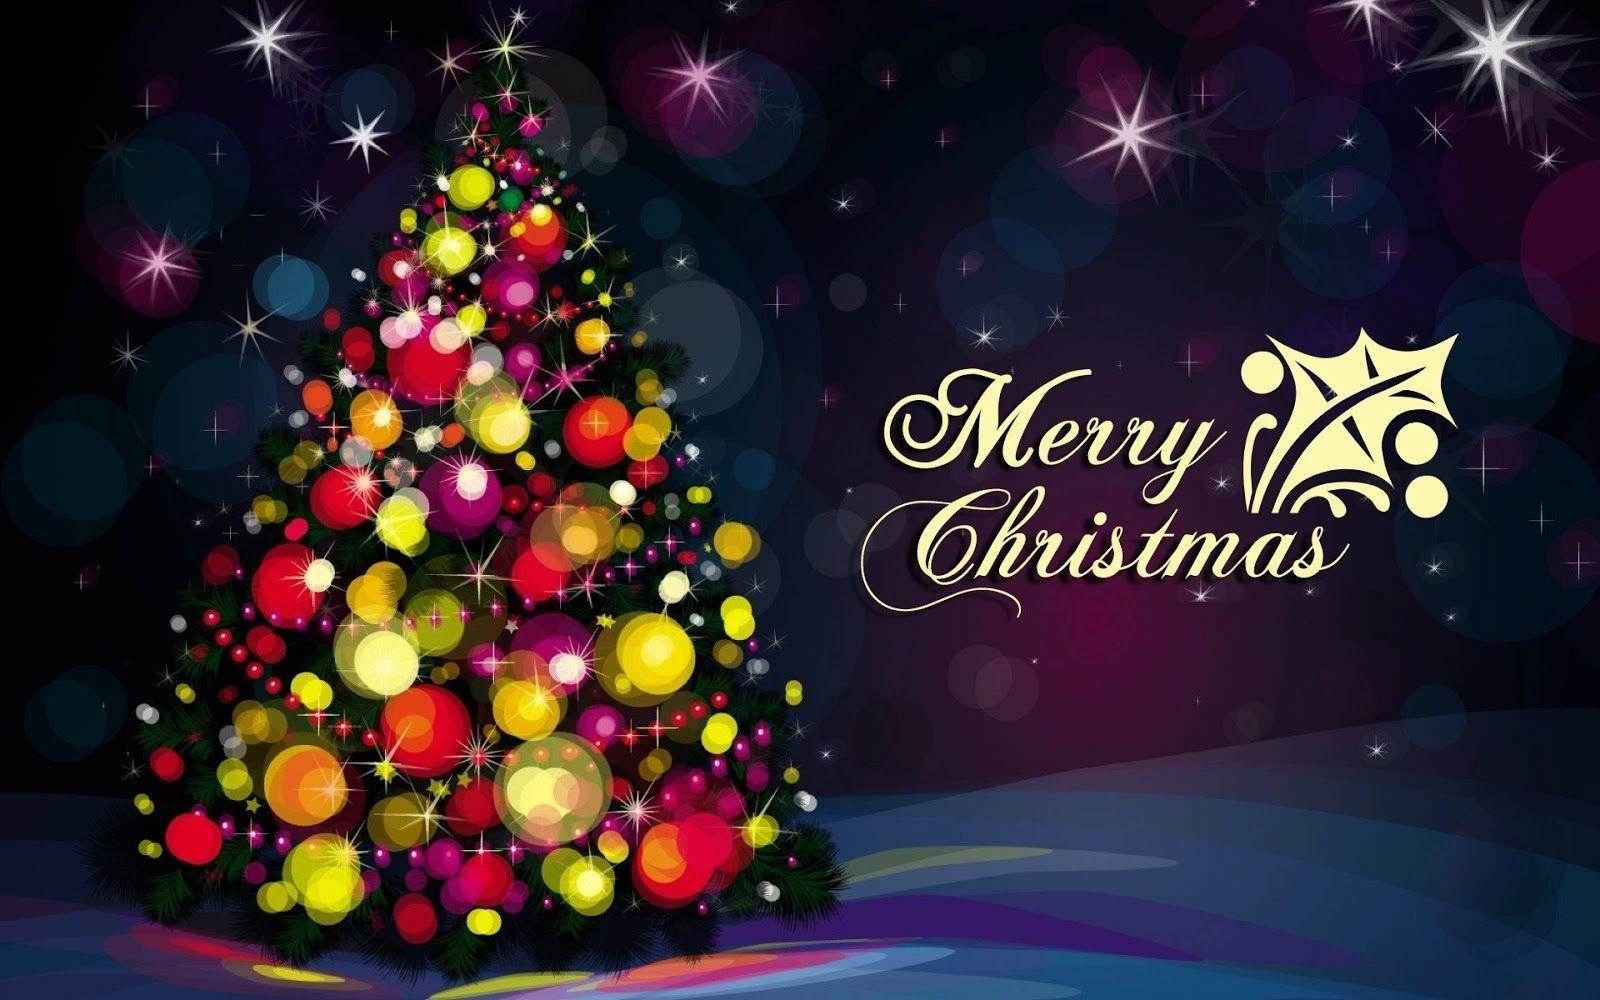 Merry Christmas Image 2018 Download For Facebook. Merry